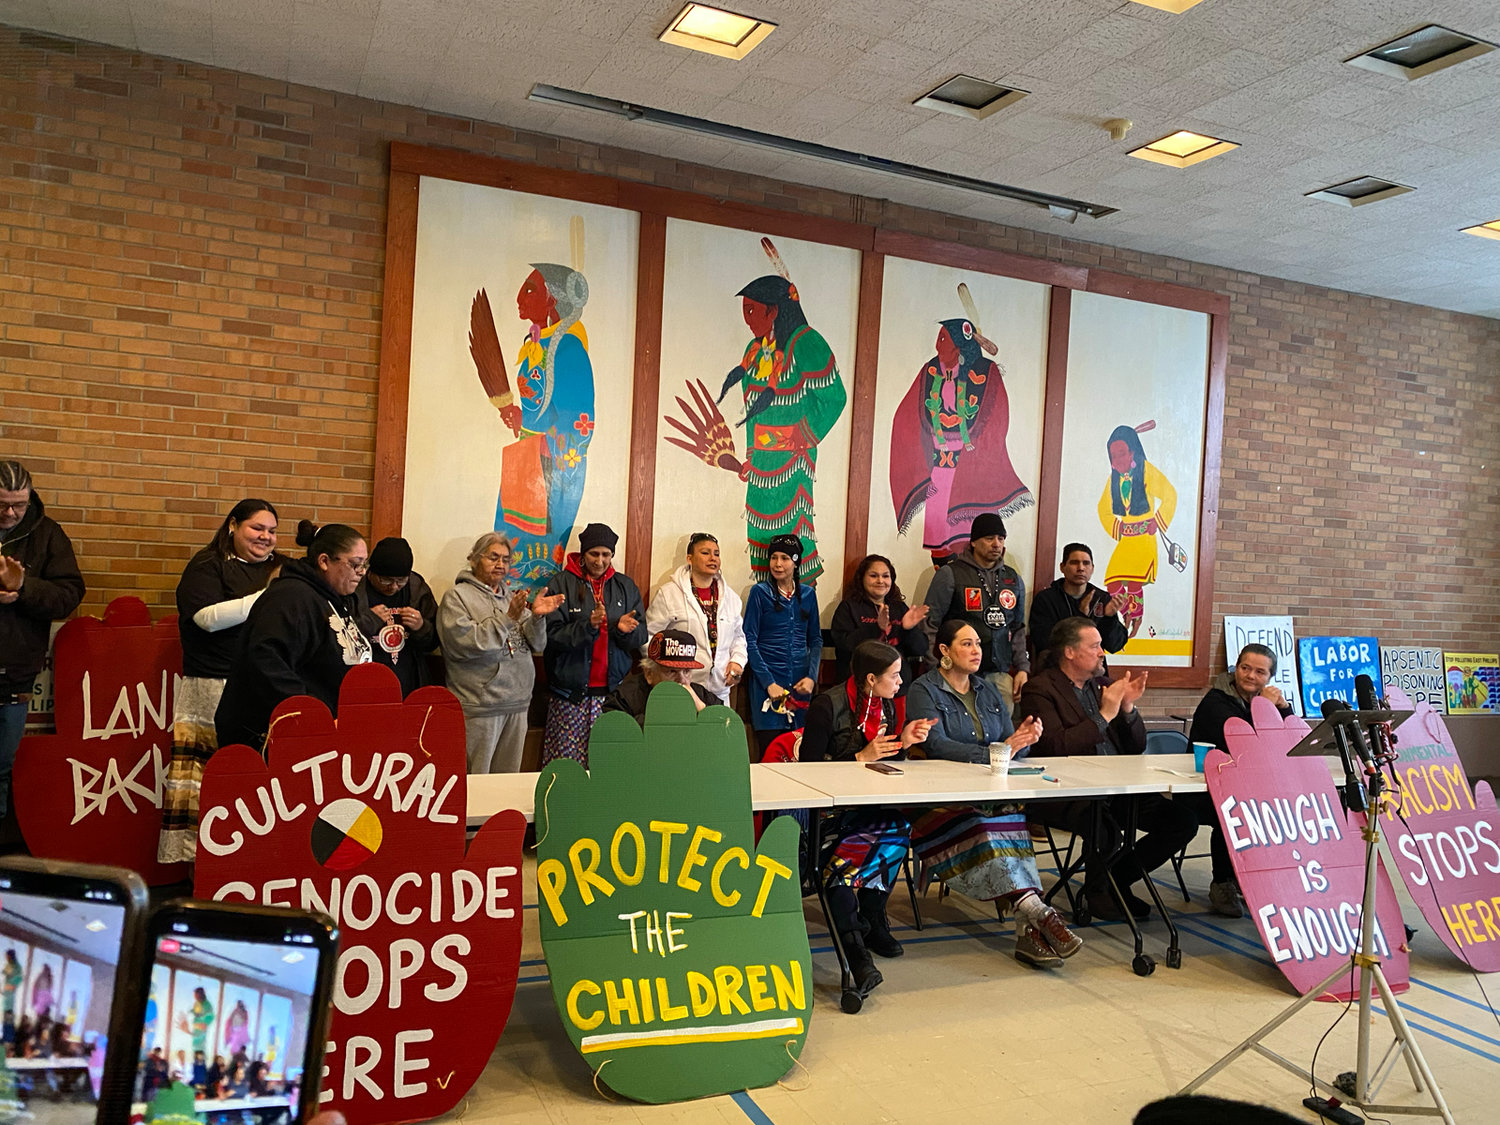 A press conference was held on Wednesday, Feb. 22, 2023 at the Minnesota Indian Women’s Resource Center by Indigenous tribal members opposed to the demolition of the Roof Depot site for the city's public works site expansion. The 7.5-acre property is owned by the city, but the community's vision for the site includes an indoor urban farm. They were working to purchase the property in 2015 when the city threatened eminent domain and purchased it at a higher cost. (Photo by Tesha M. Christensen)